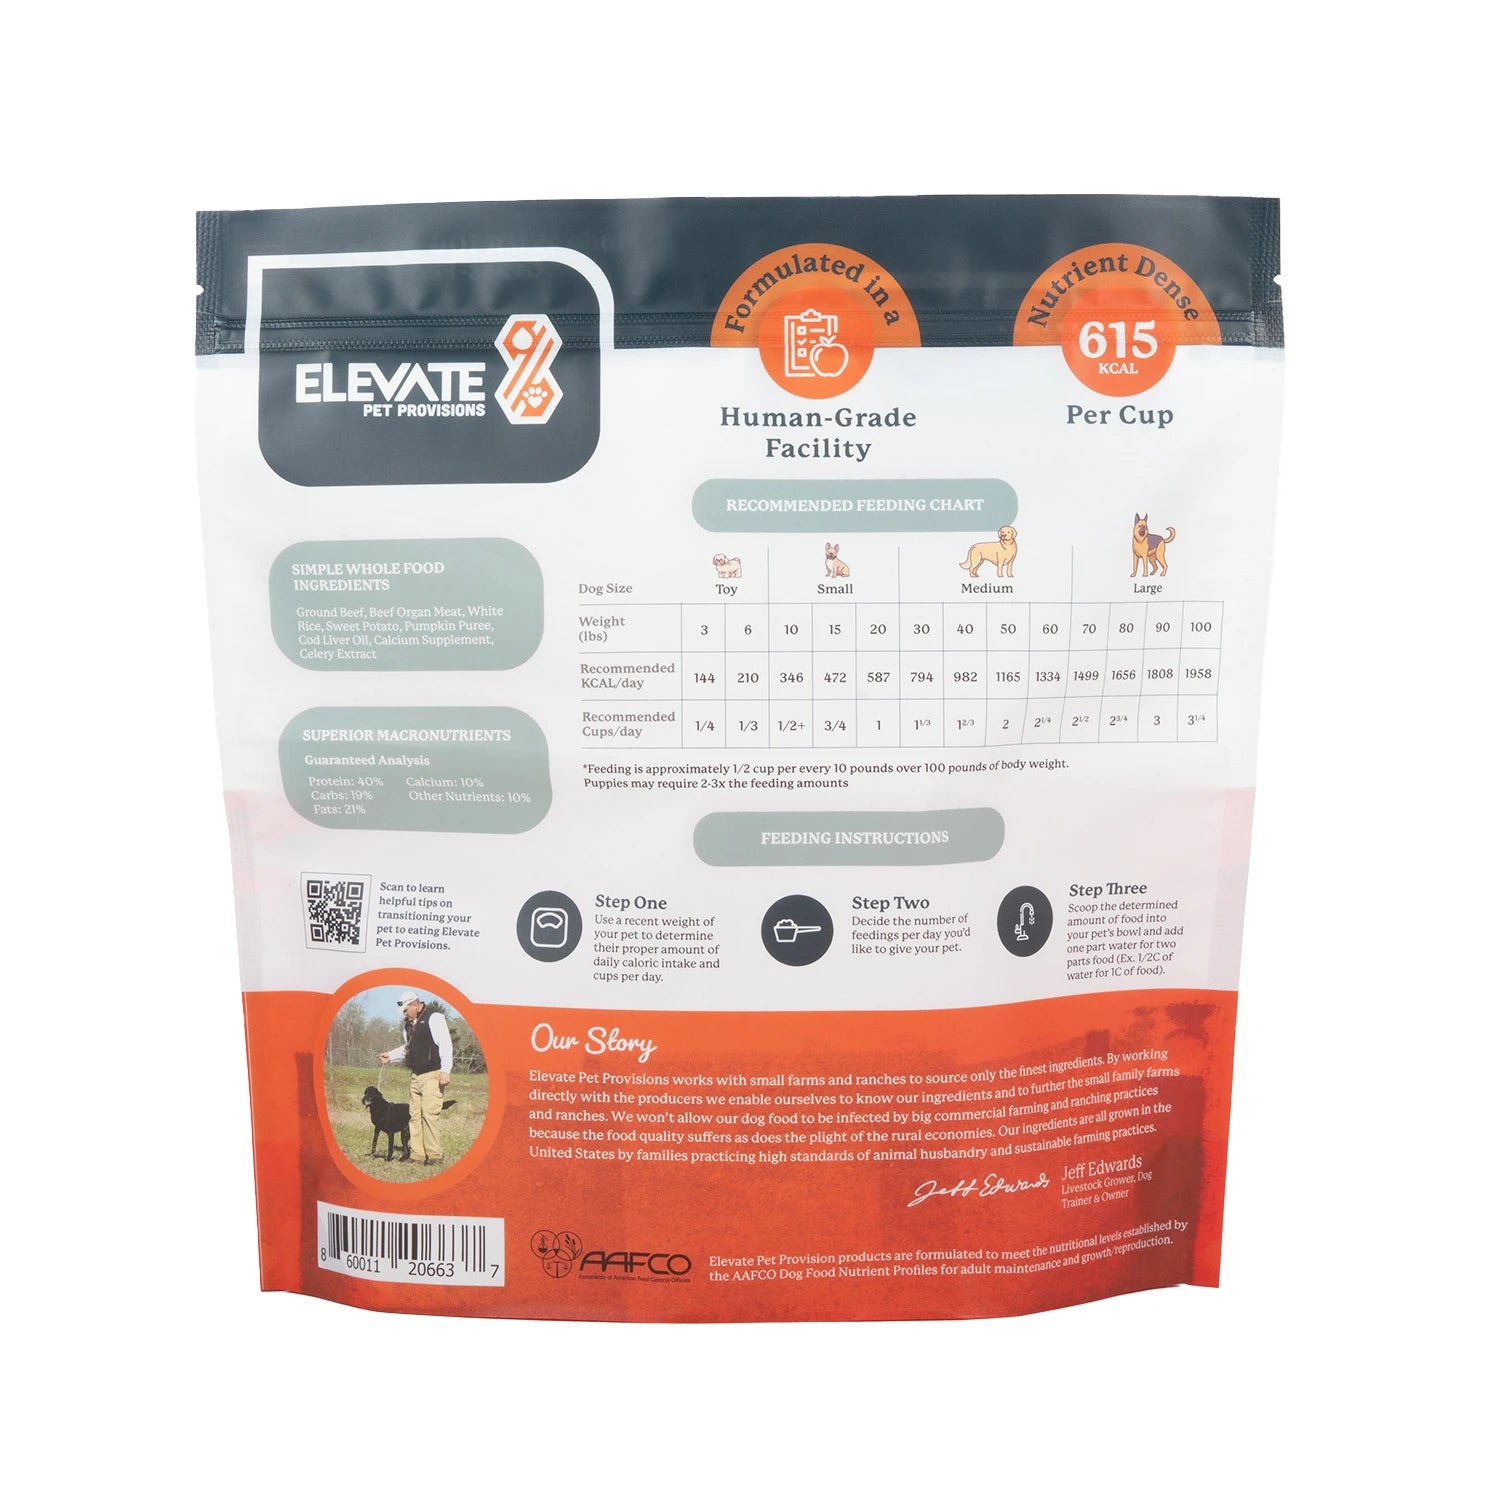 Elevate Pet Provisions - Formulated in a Human-Grade Facility - Nutrient Dense 615KCAL Per Cup